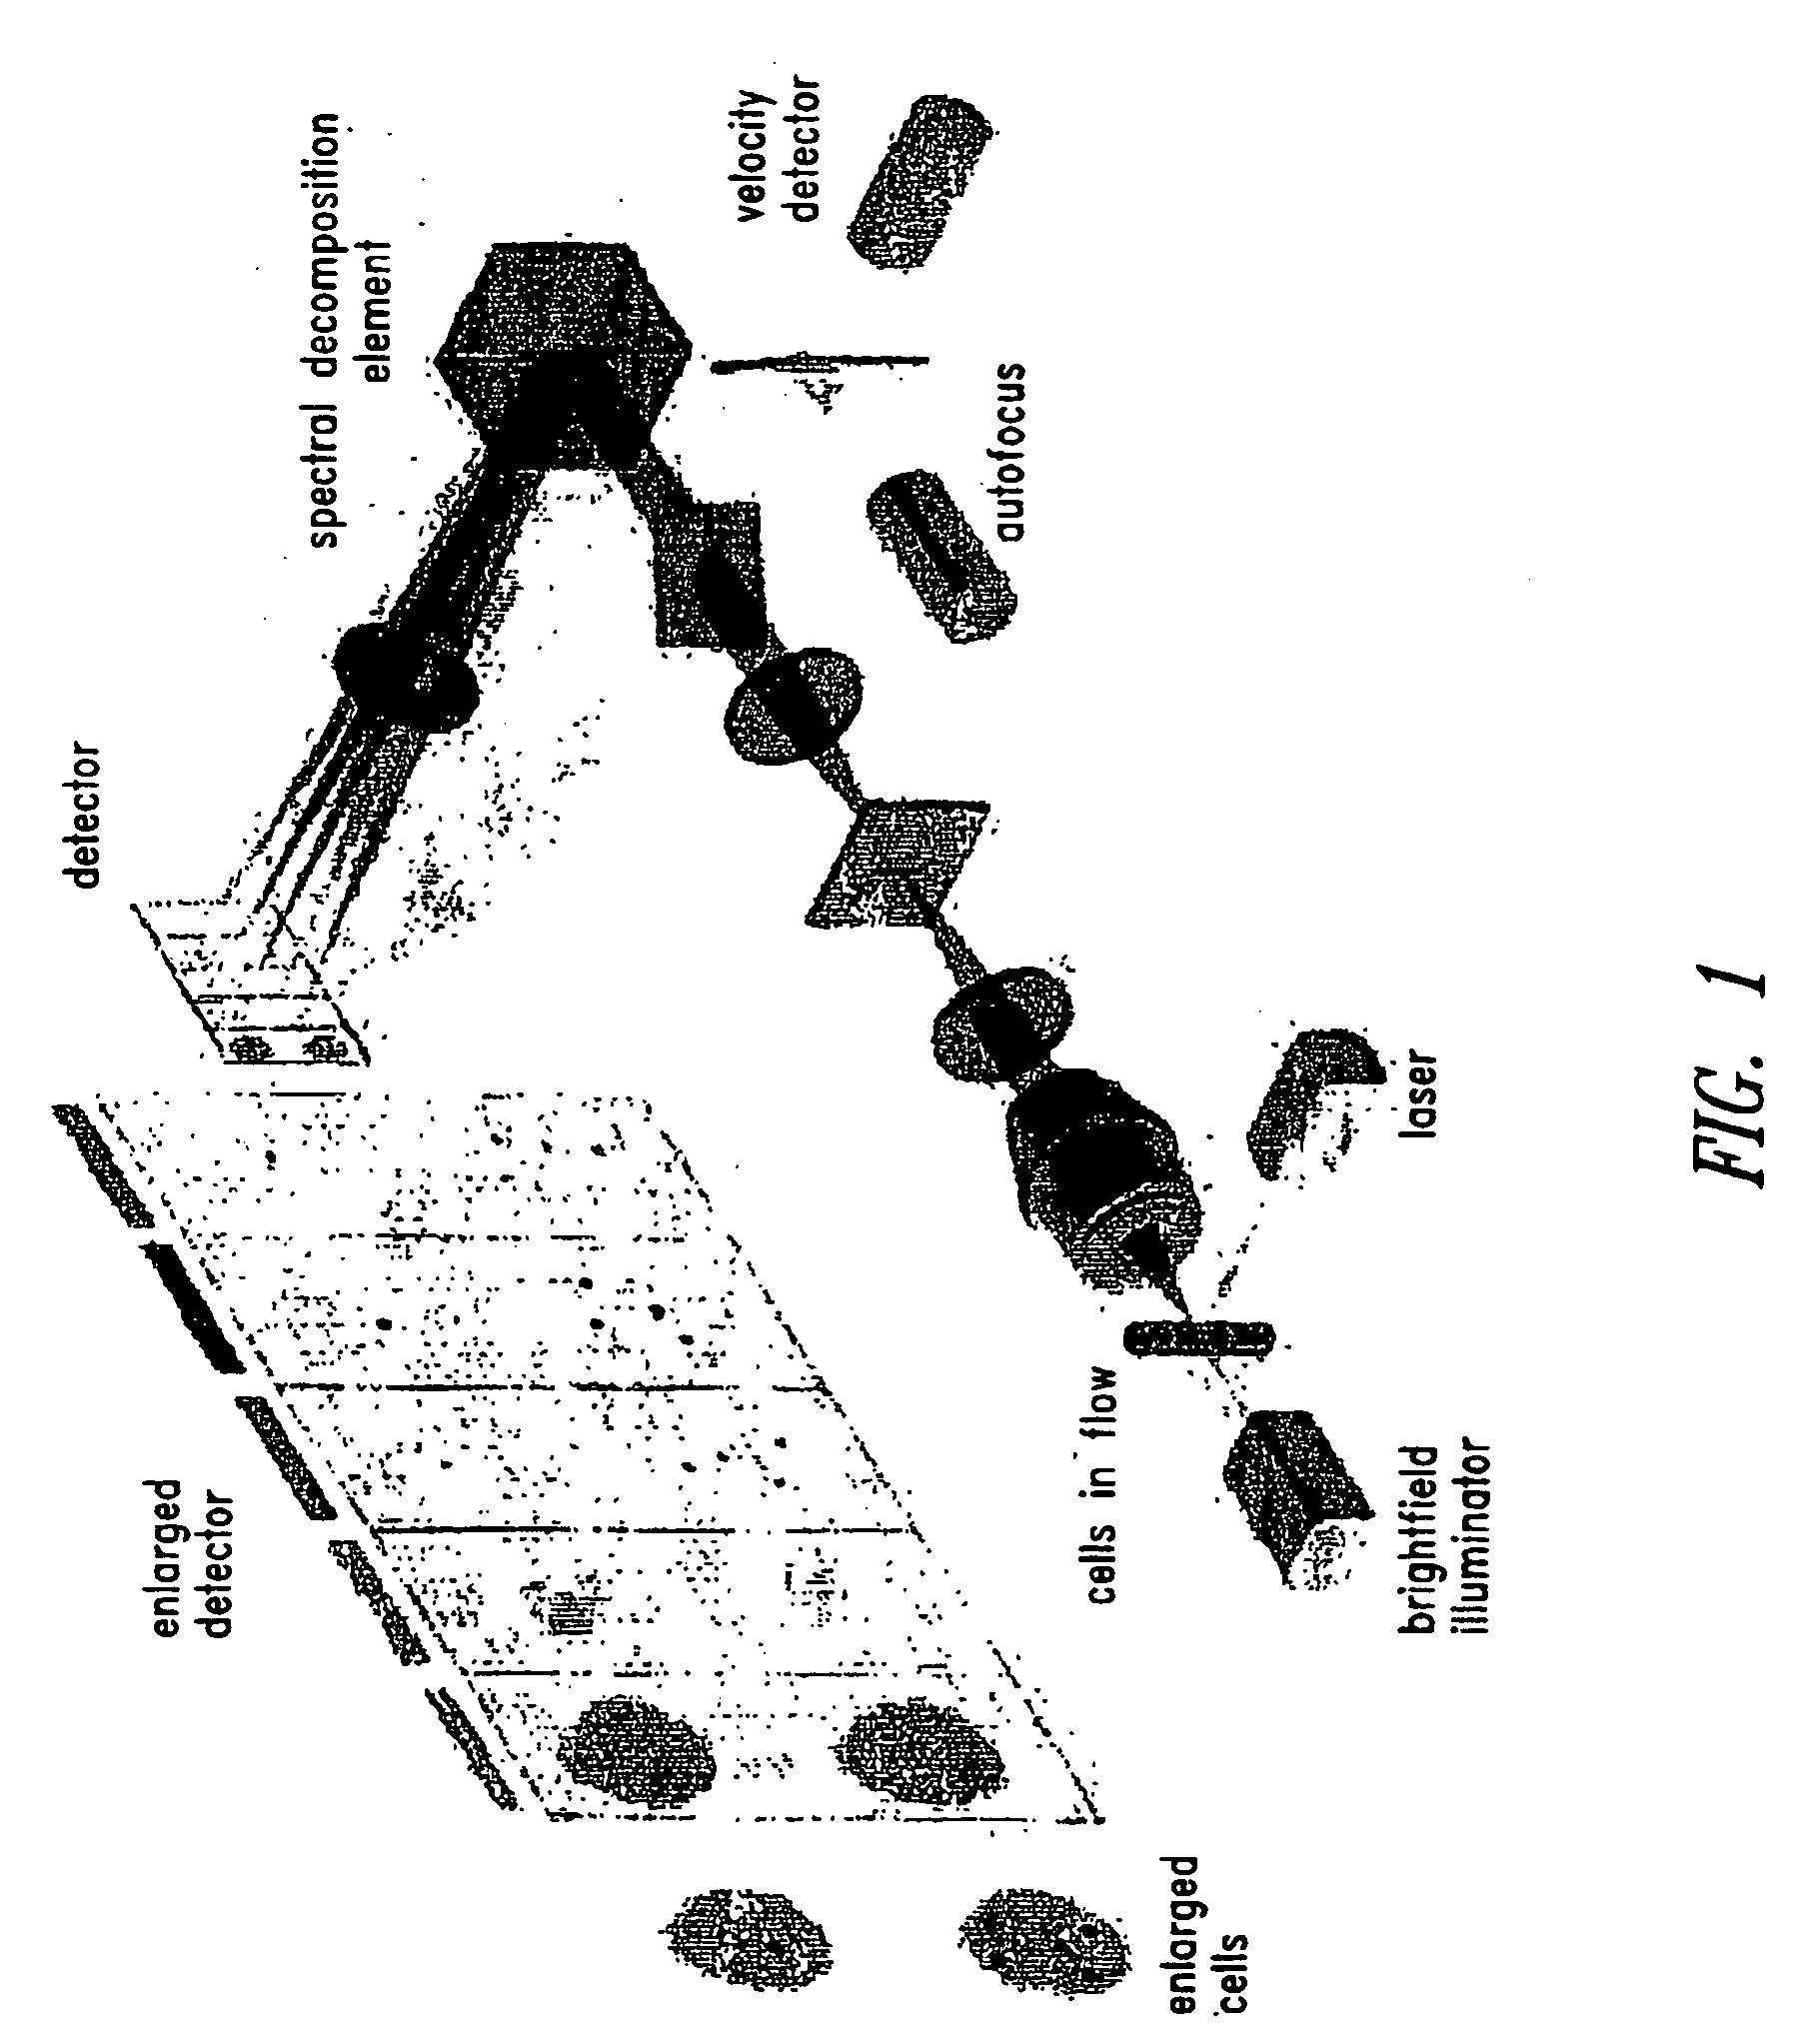 Method for imaging and differential analysis of cells